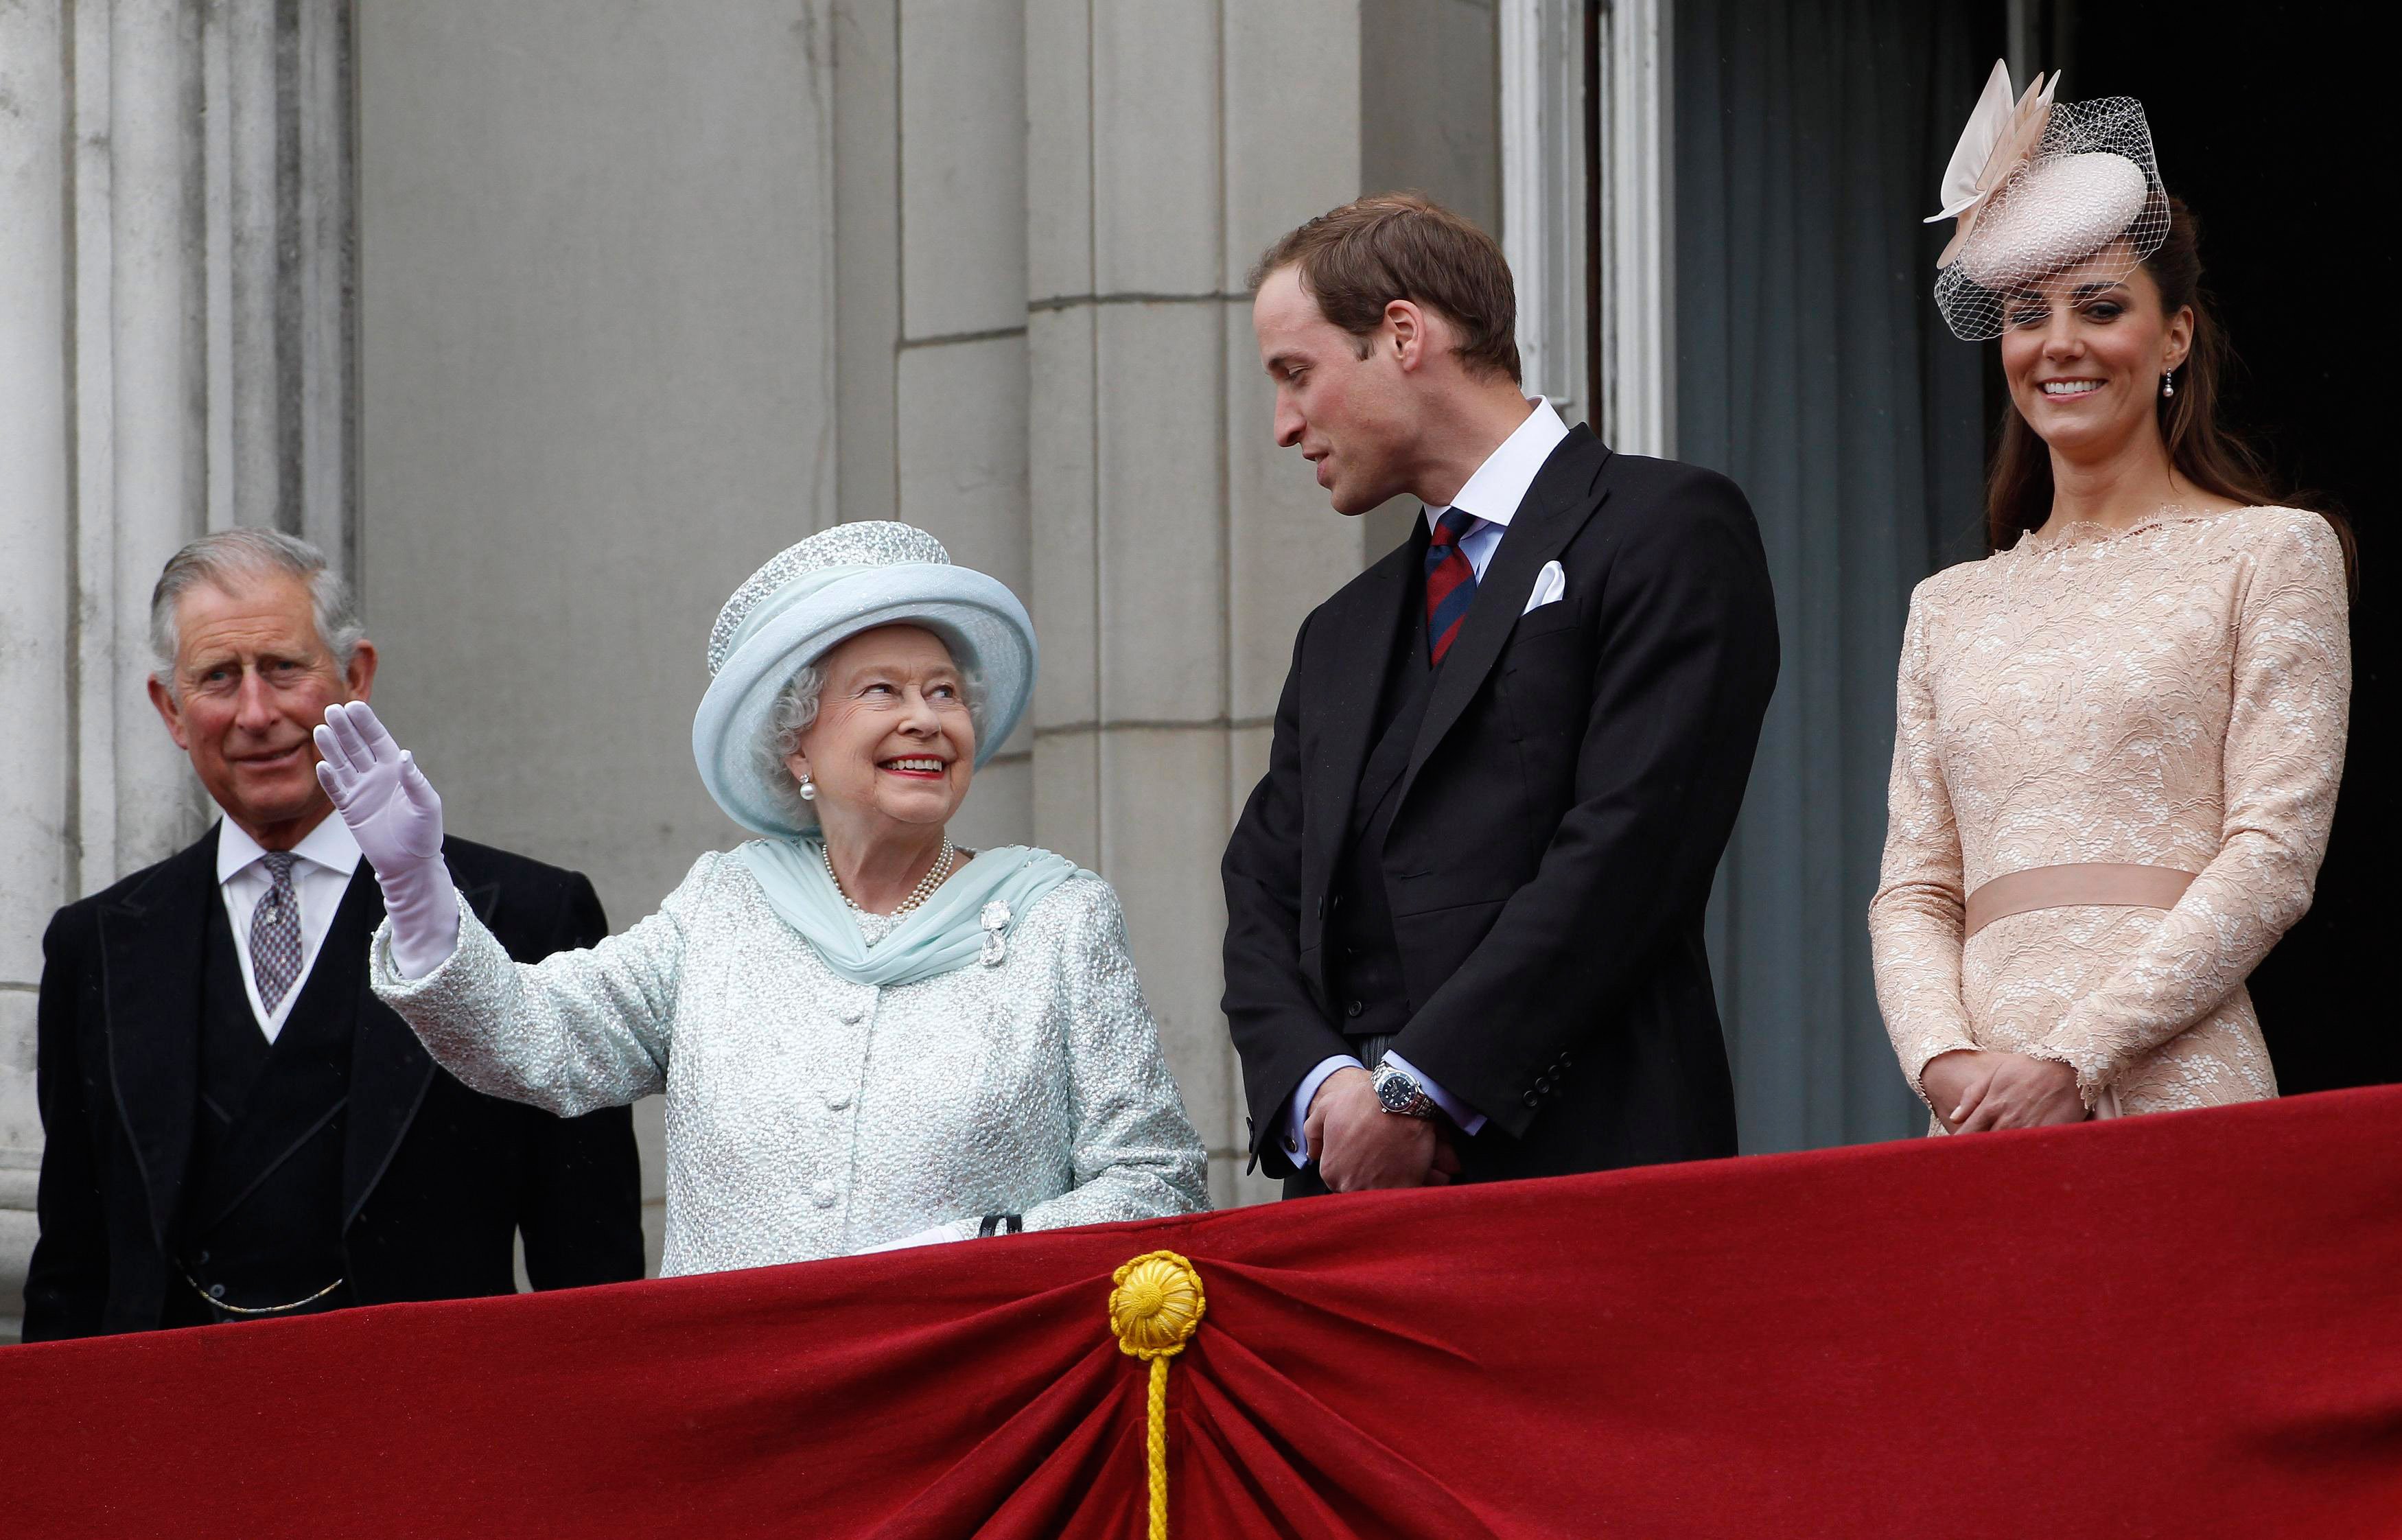 (L to R): Prince Charles, Queen Elizabeth II, Prince William, and Kate Middleton standing on the Buckingham Palace balcony during the finale of the Queen's Diamond Jubilee celebrations